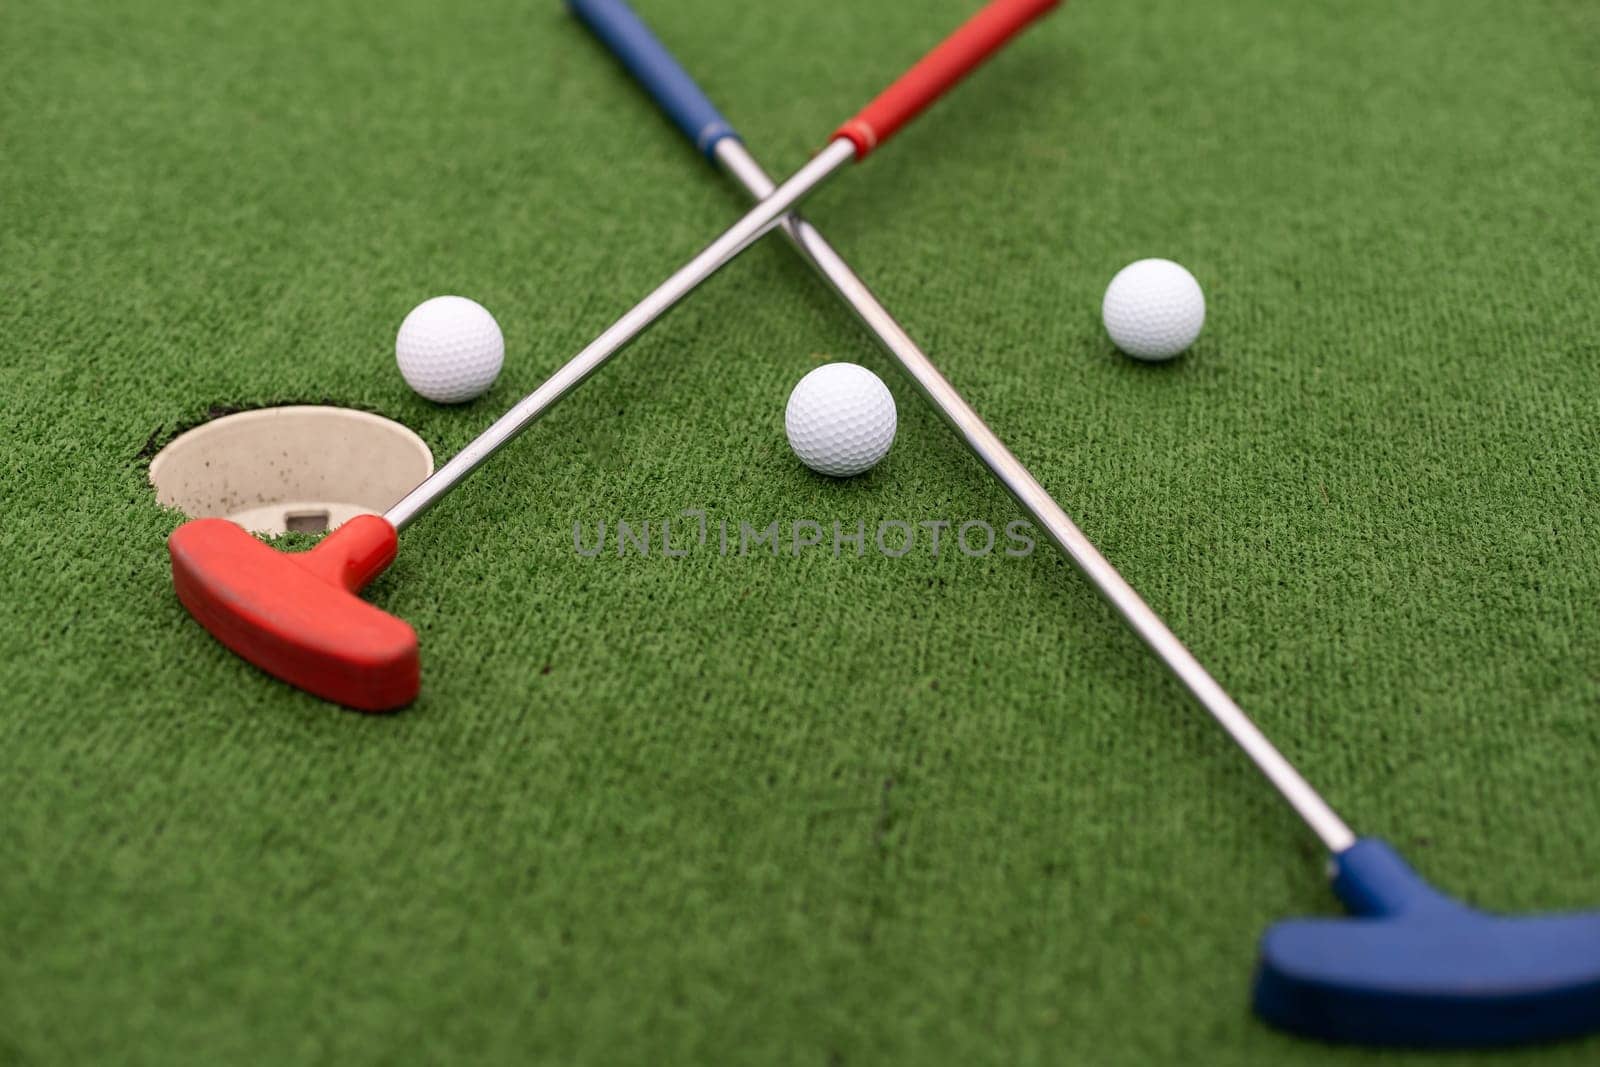 Mini golf close-up, colorful golf putters, balls by Andelov13